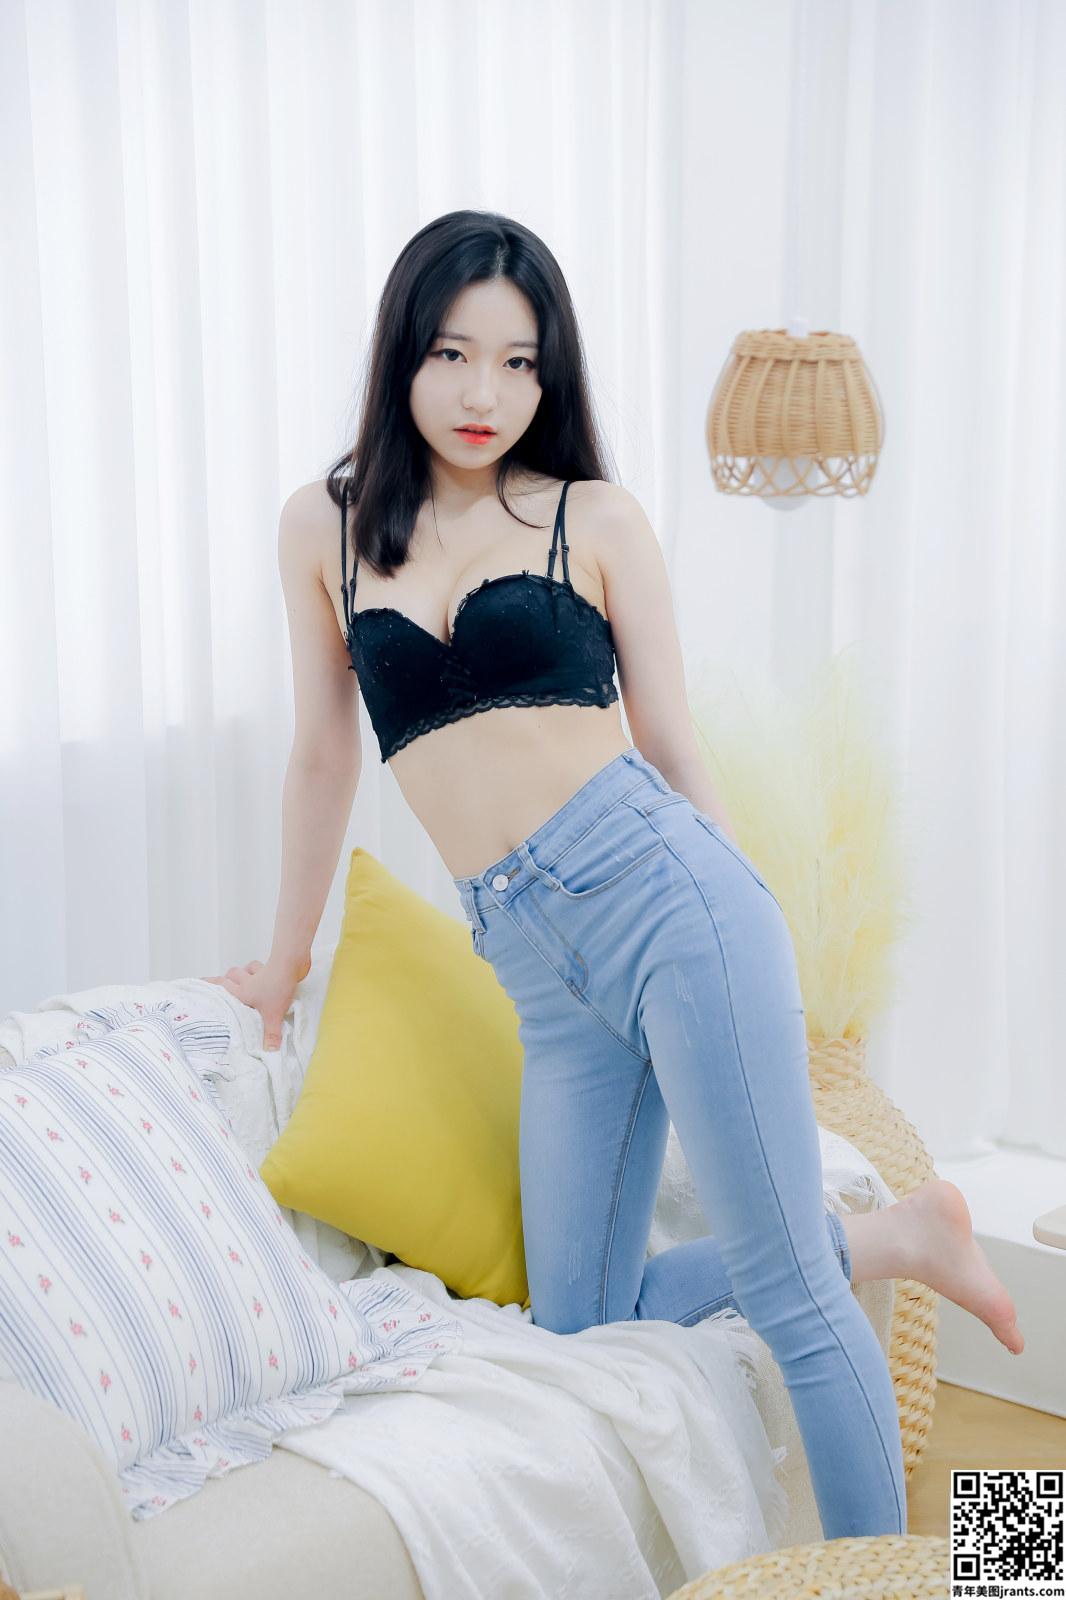 [JOApictures] &#8211; Sehee &#8211; JOA 21. MARCH VOL. 1